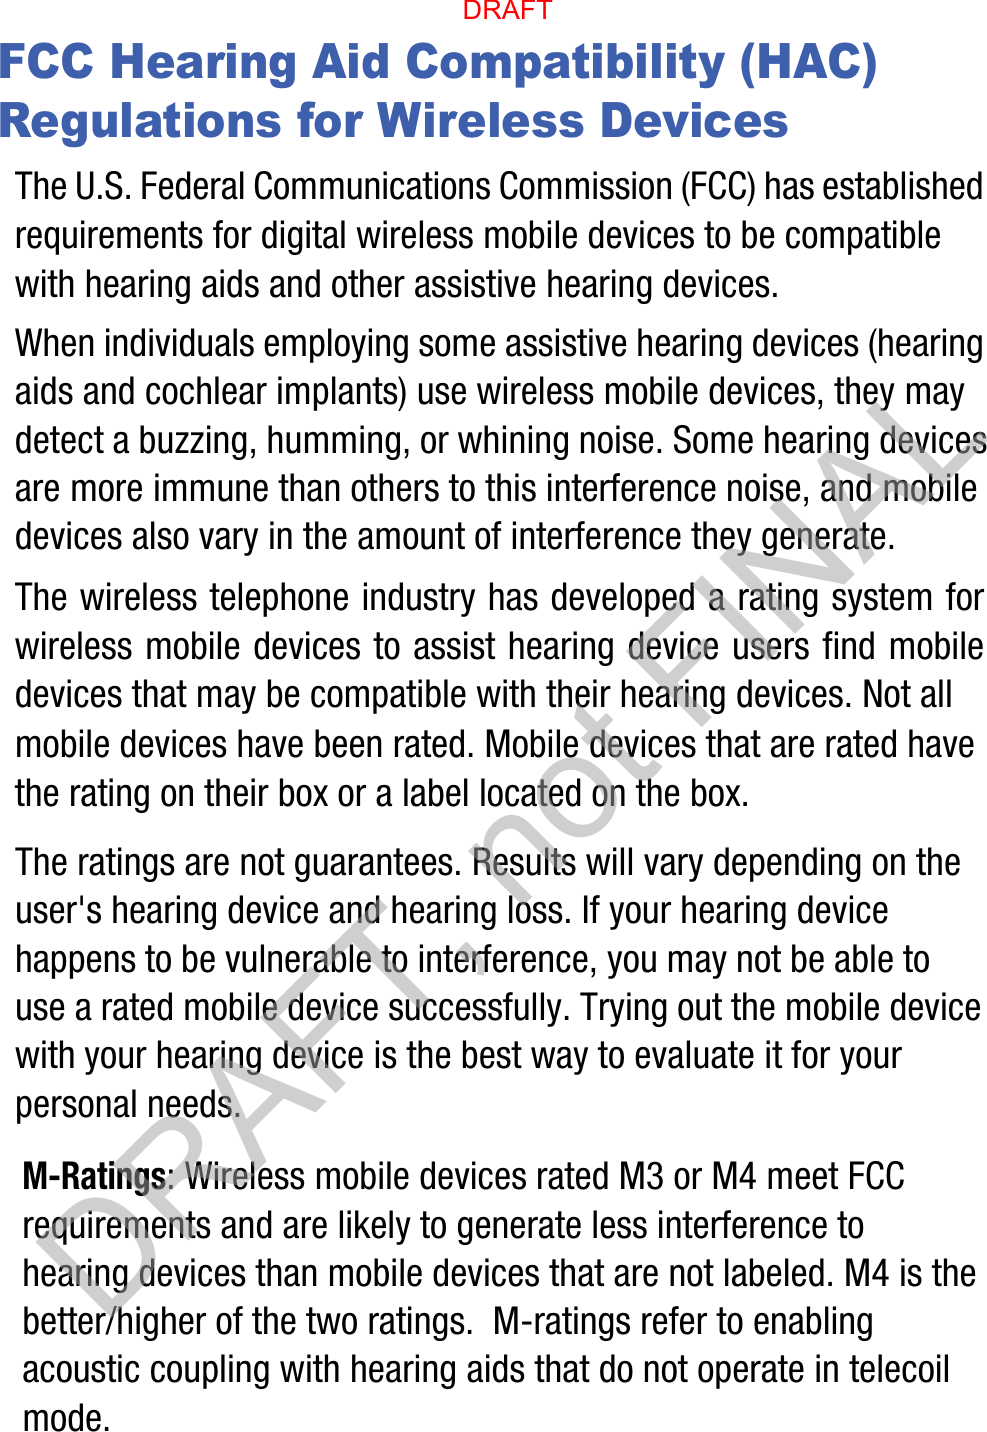 FCC Hearing Aid Compatibility (HAC) Regulations for Wireless DevicesThe U.S. Federal Communications Commission (FCC) has established requirements for digital wireless mobile devices to be compatible with hearing aids and other assistive hearing devices.When individuals employing some assistive hearing devices (hearing aids and cochlear implants) use wireless mobile devices, they may detect a buzzing, humming, or whining noise. Some hearing devices are more immune than others to this interference noise, and mobile devices also vary in the amount of interference they generate.The wireless telephone industry has developed a rating system for wireless mobile devices to assist hearing device users find mobile devices that may be compatible with their hearing devices. Not all mobile devices have been rated. Mobile devices that are rated have the rating on their box or a label located on the box.The ratings are not guarantees. Results will vary depending on the user&apos;s hearing device and hearing loss. If your hearing device happens to be vulnerable to interference, you may not be able to use a rated mobile device successfully. Trying out the mobile device with your hearing device is the best way to evaluate it for your personal needs.M-Ratings: Wireless mobile devices rated M3 or M4 meet FCC requirements and are likely to generate less interference to hearing devices than mobile devices that are not labeled. M4 is the better/higher of the two ratings.  M-ratings refer to enabling acoustic coupling with hearing aids that do not operate in telecoil mode.DRAFT, not FINALDRAFT